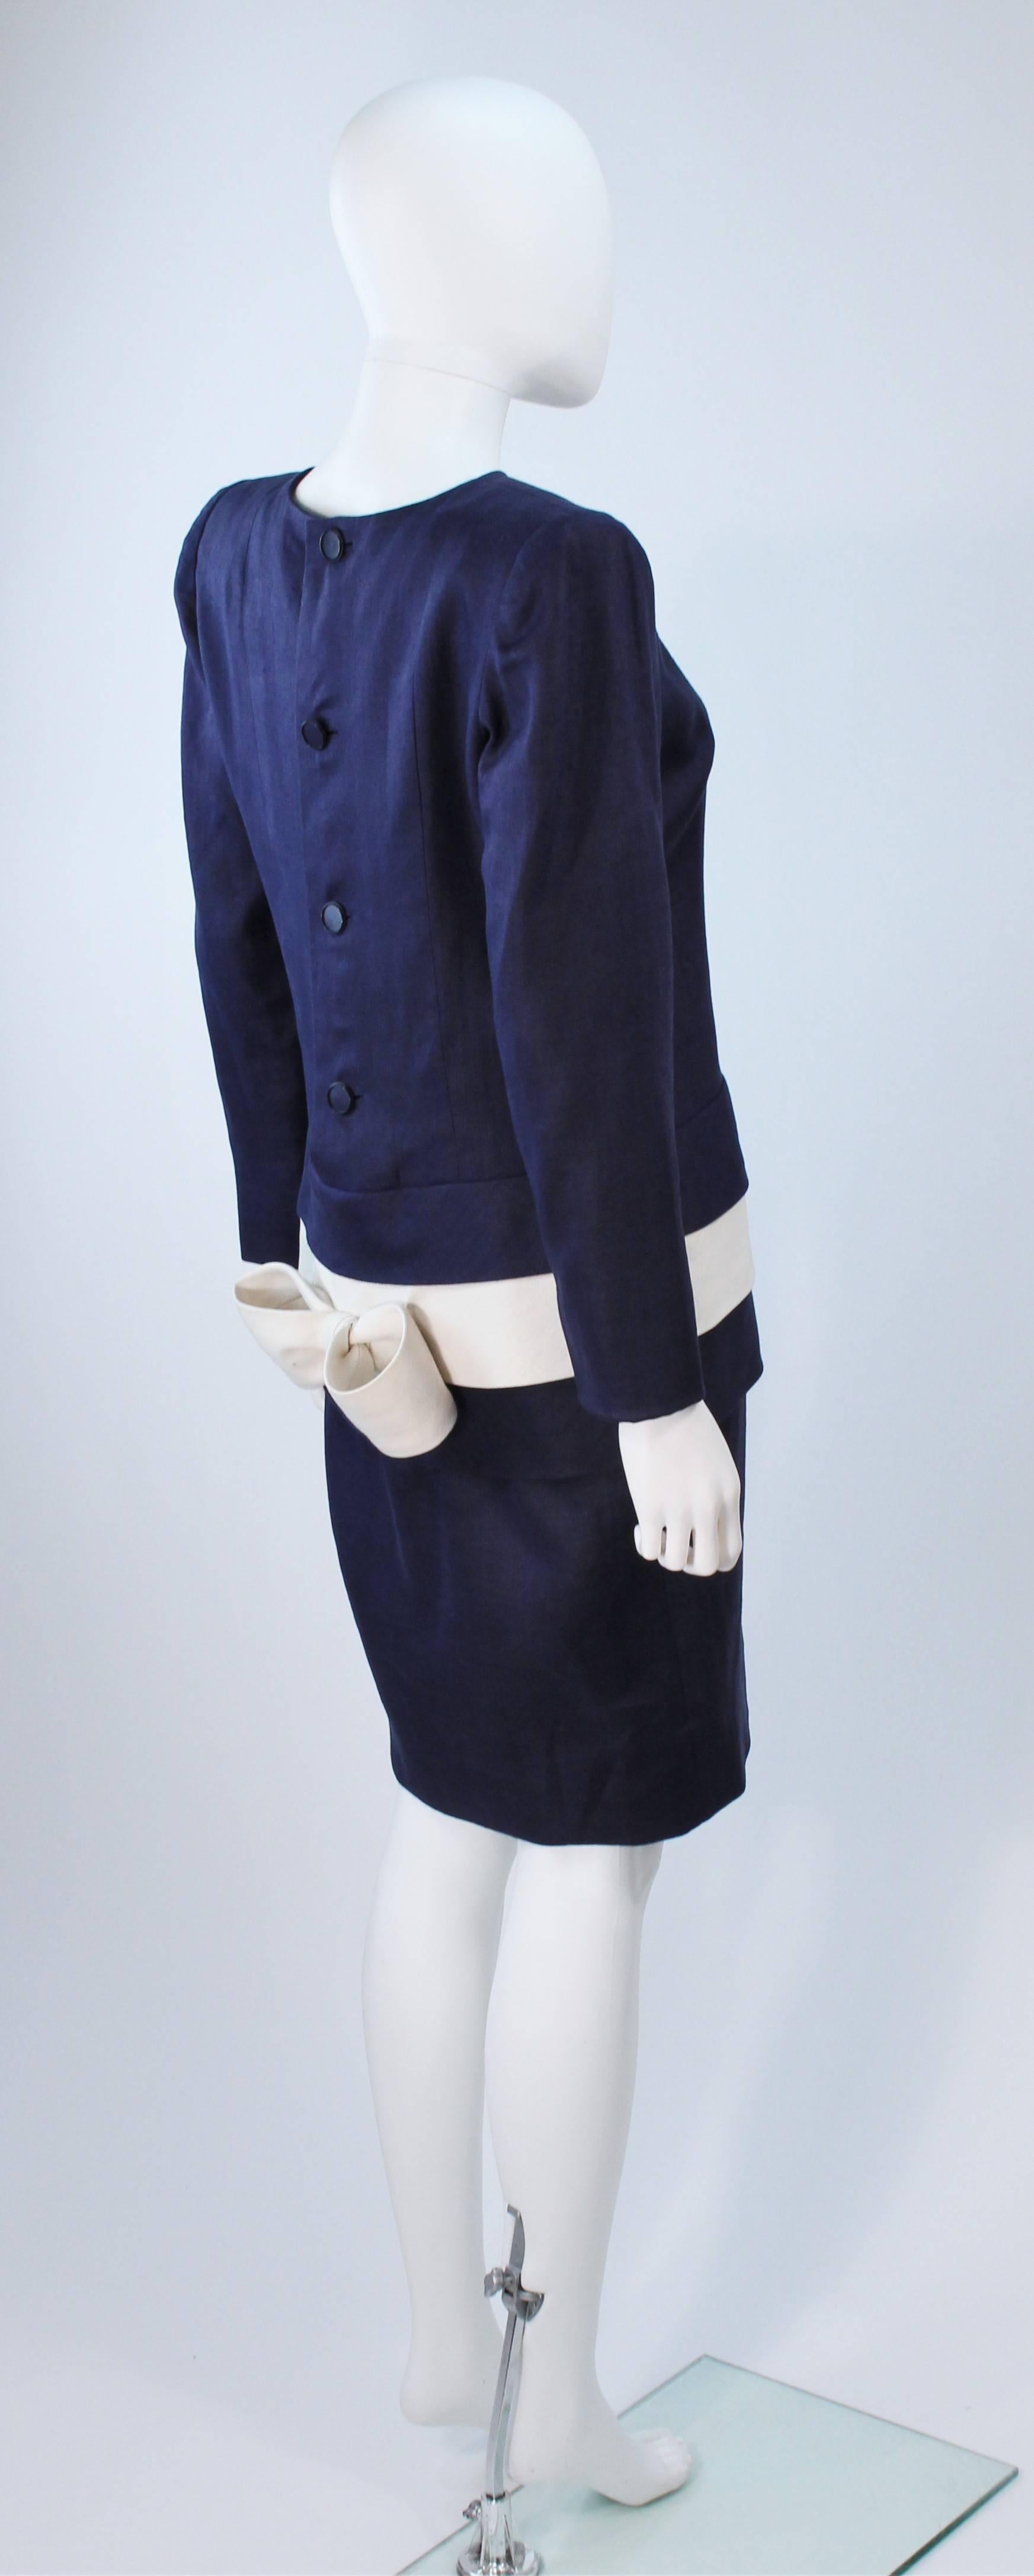 GIVENCHY COUTURE Navy Linen Color Block Dress with Bow Size 6 2